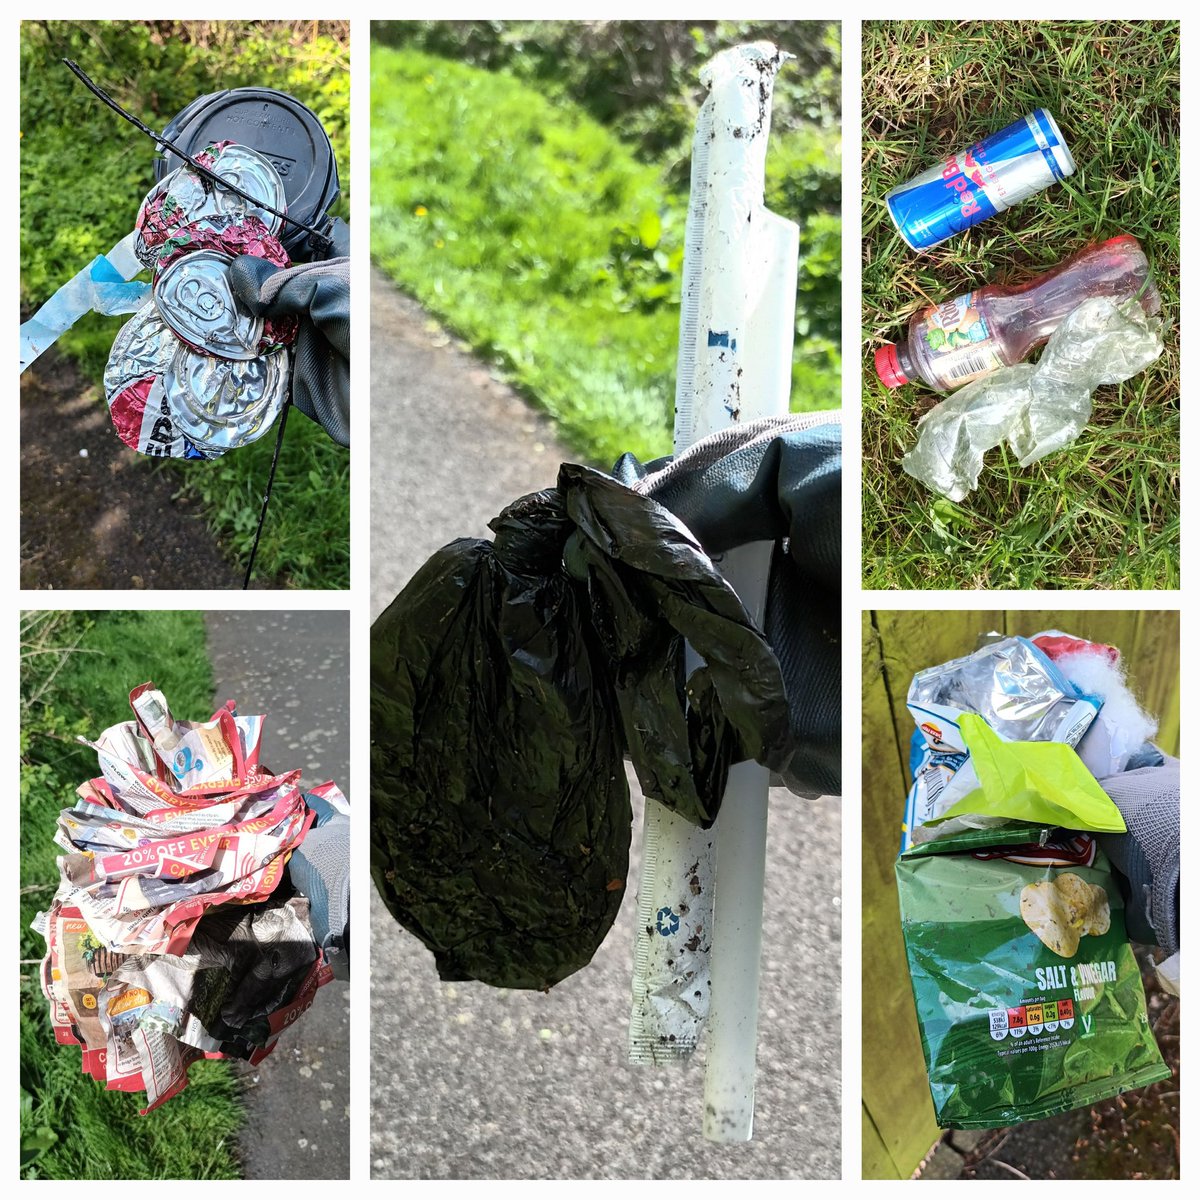 An interesting mix of items liberated from the streets and verges this week, including some very crusty boxers 🫣 and a Christmas wreath. Oh, and the @BudLightUK #tosser is back! #litter @Cleanup_UK @cleanupbritain @KeepBritainTidy @N_landCouncil #Northumberland